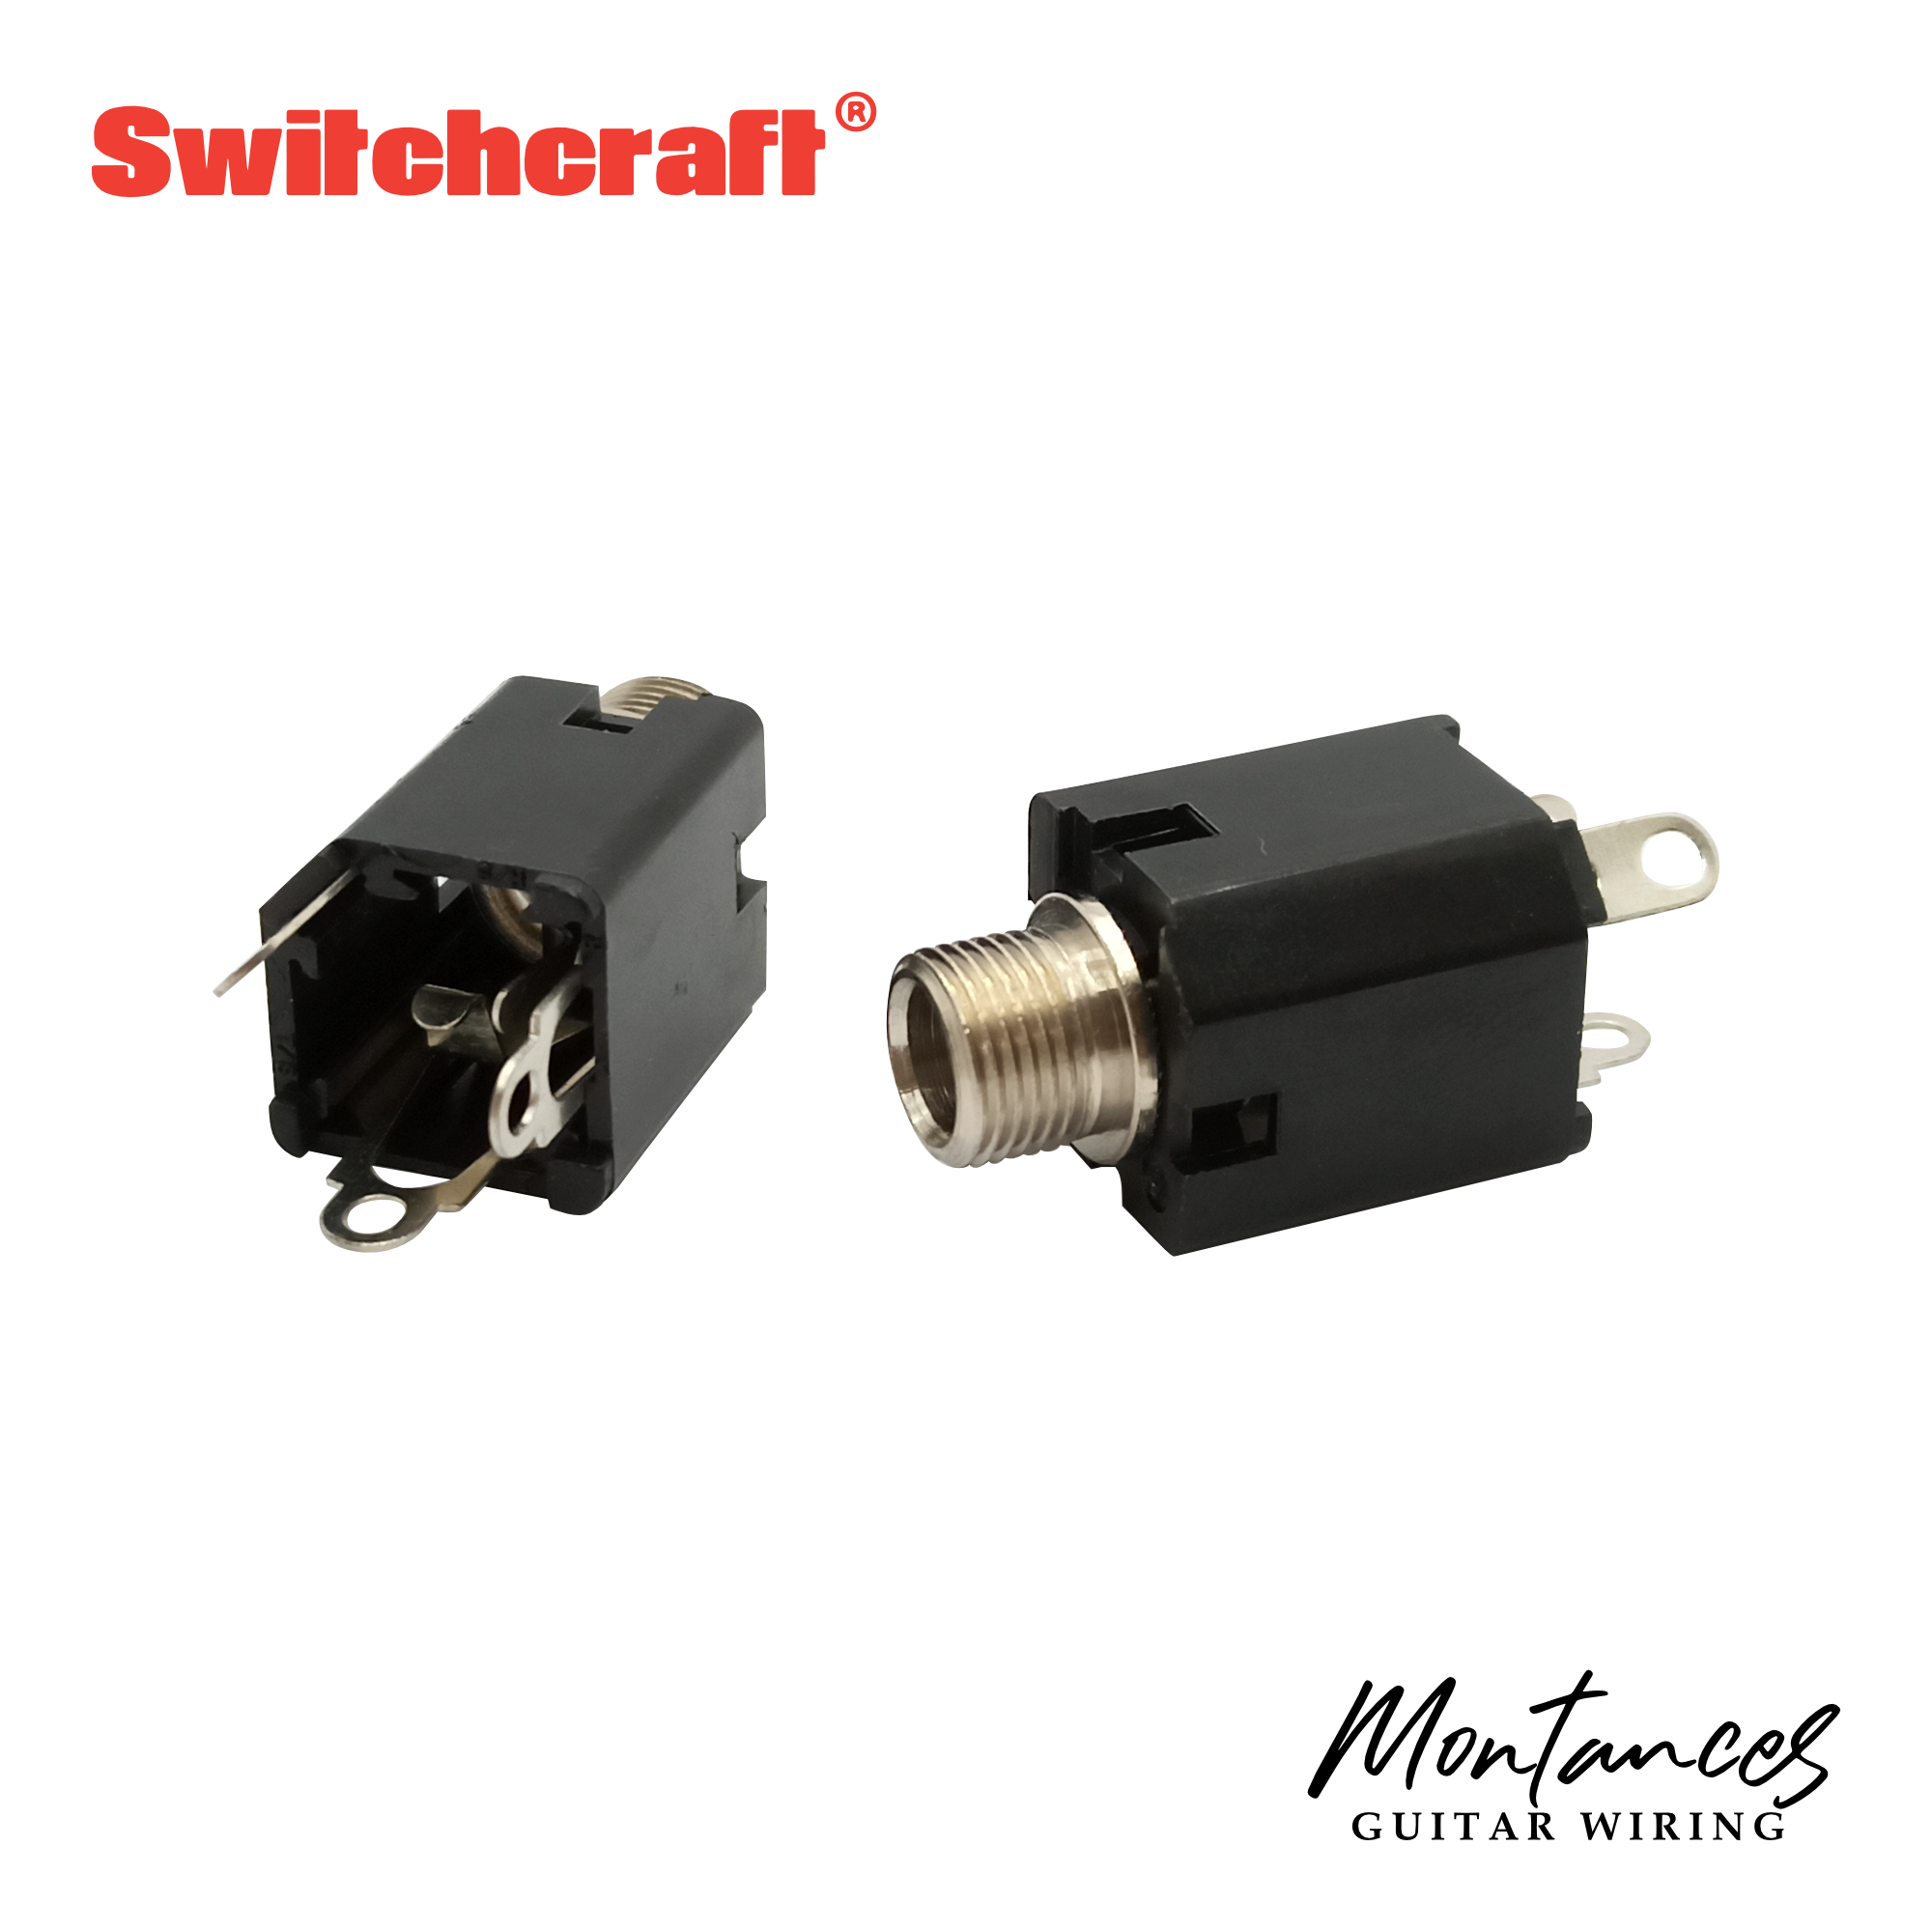 Switchcraft® Output Jack Made in USA (Enclosed Jack)